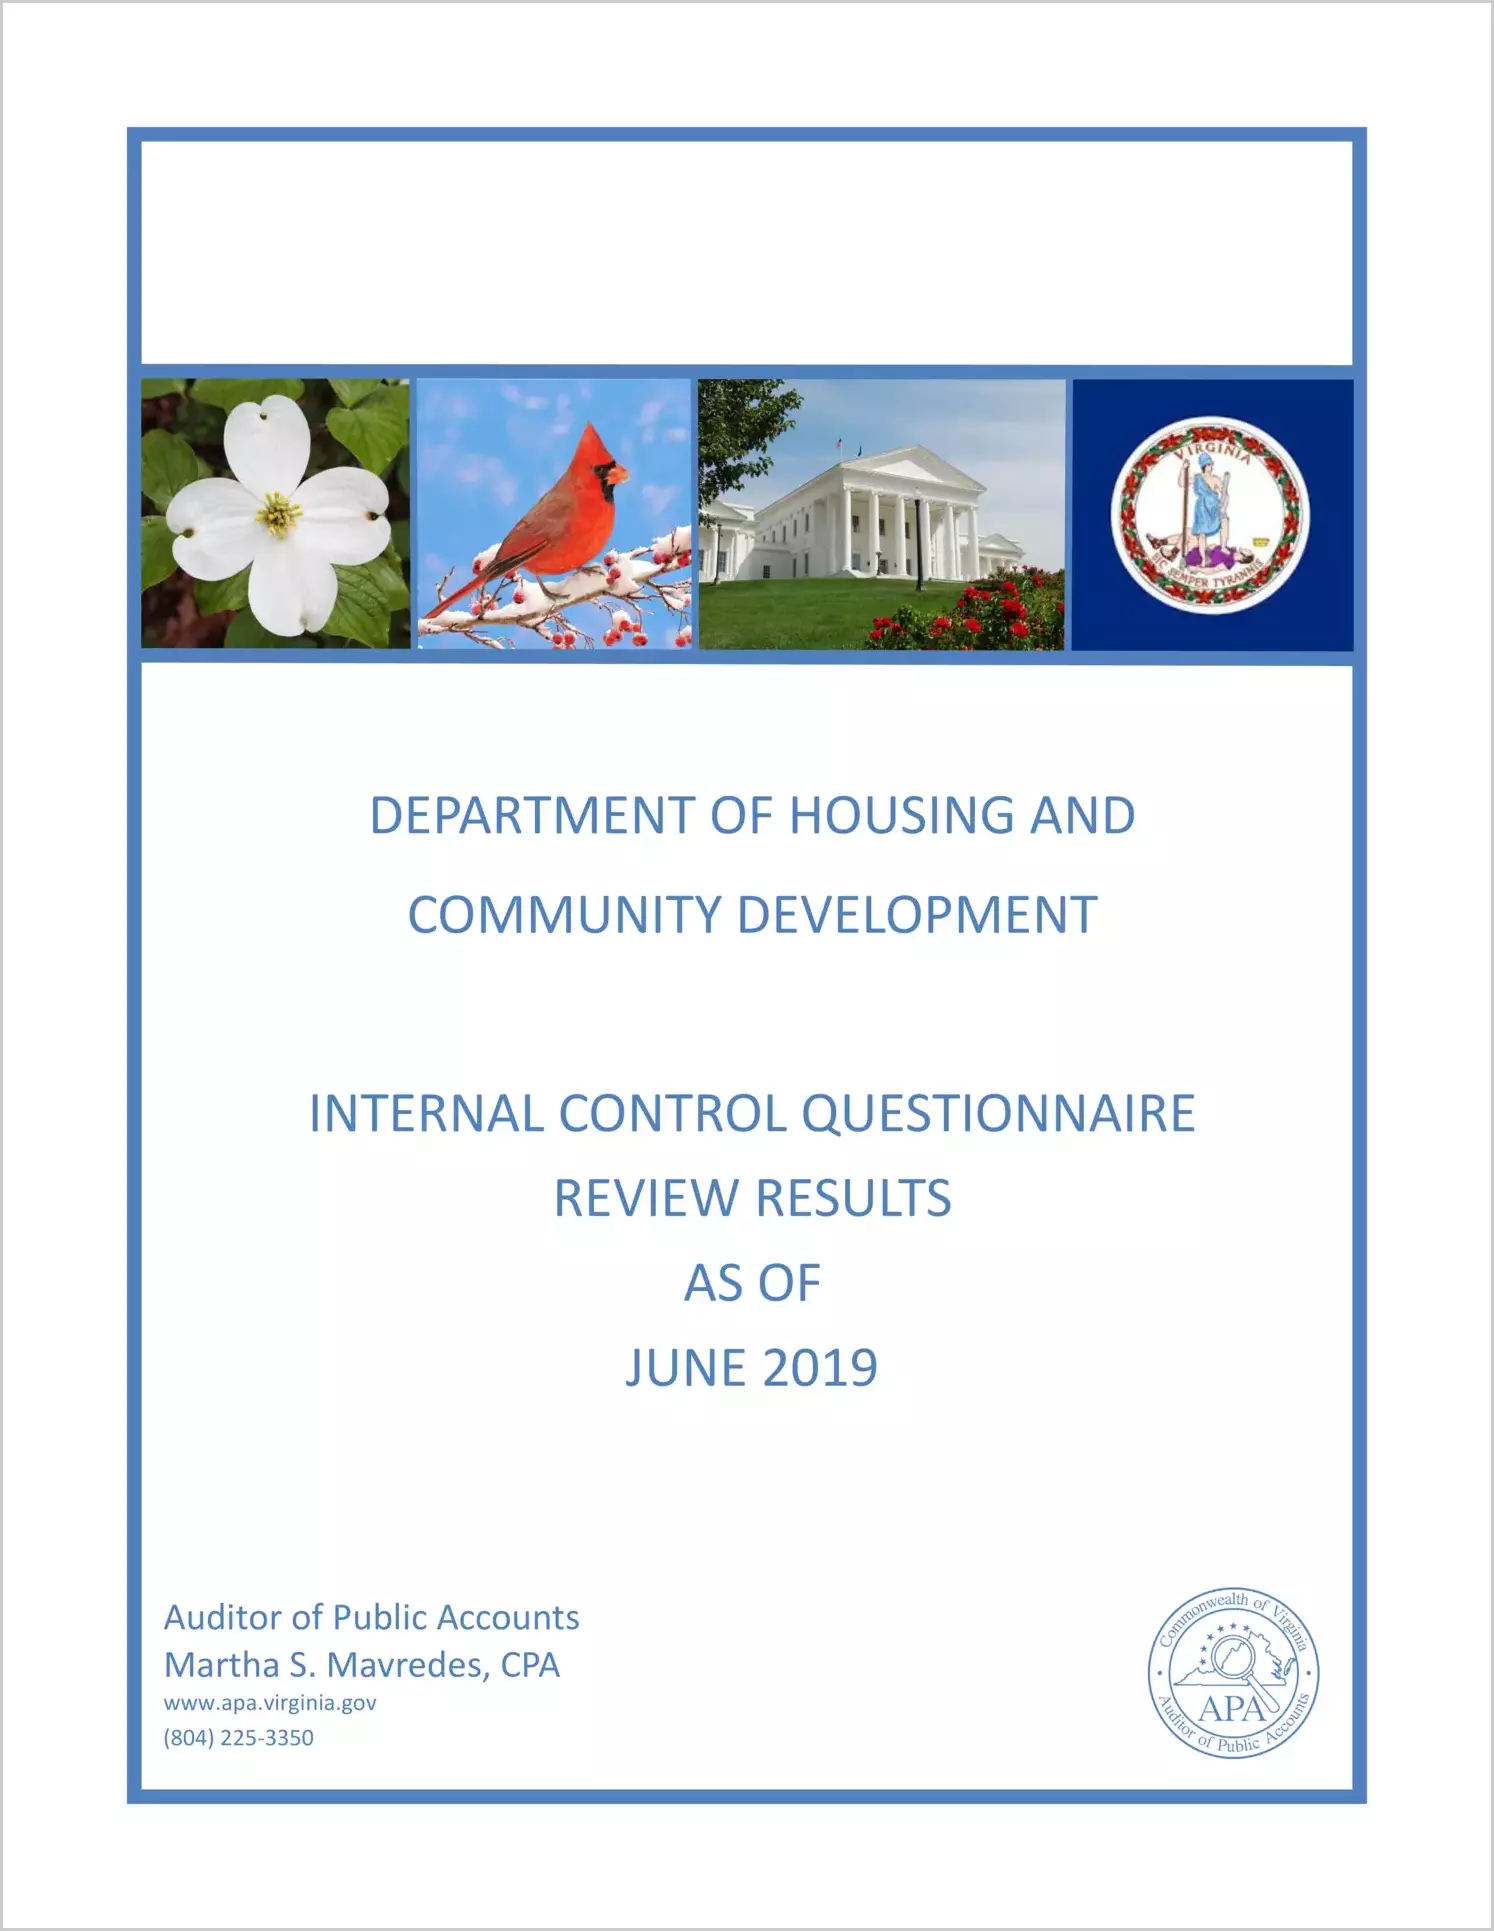 Department of Housing and Community Development Internal Control Questionnaire Review Results as of June 2019